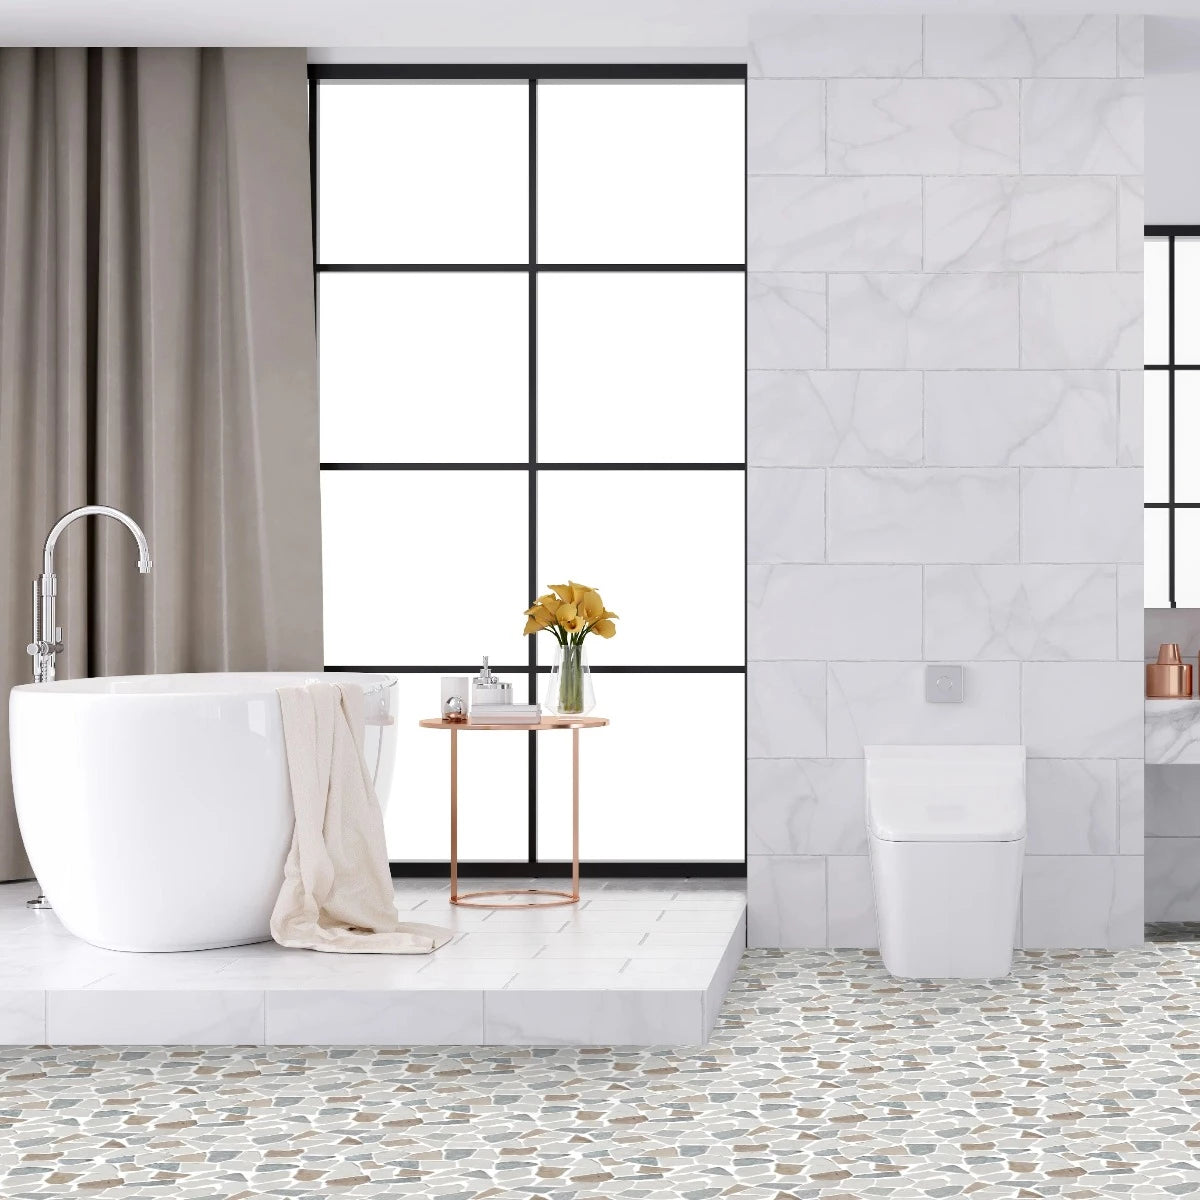 seasand tile flooring in bathroom surrounded by modern tub, toilet, and sink